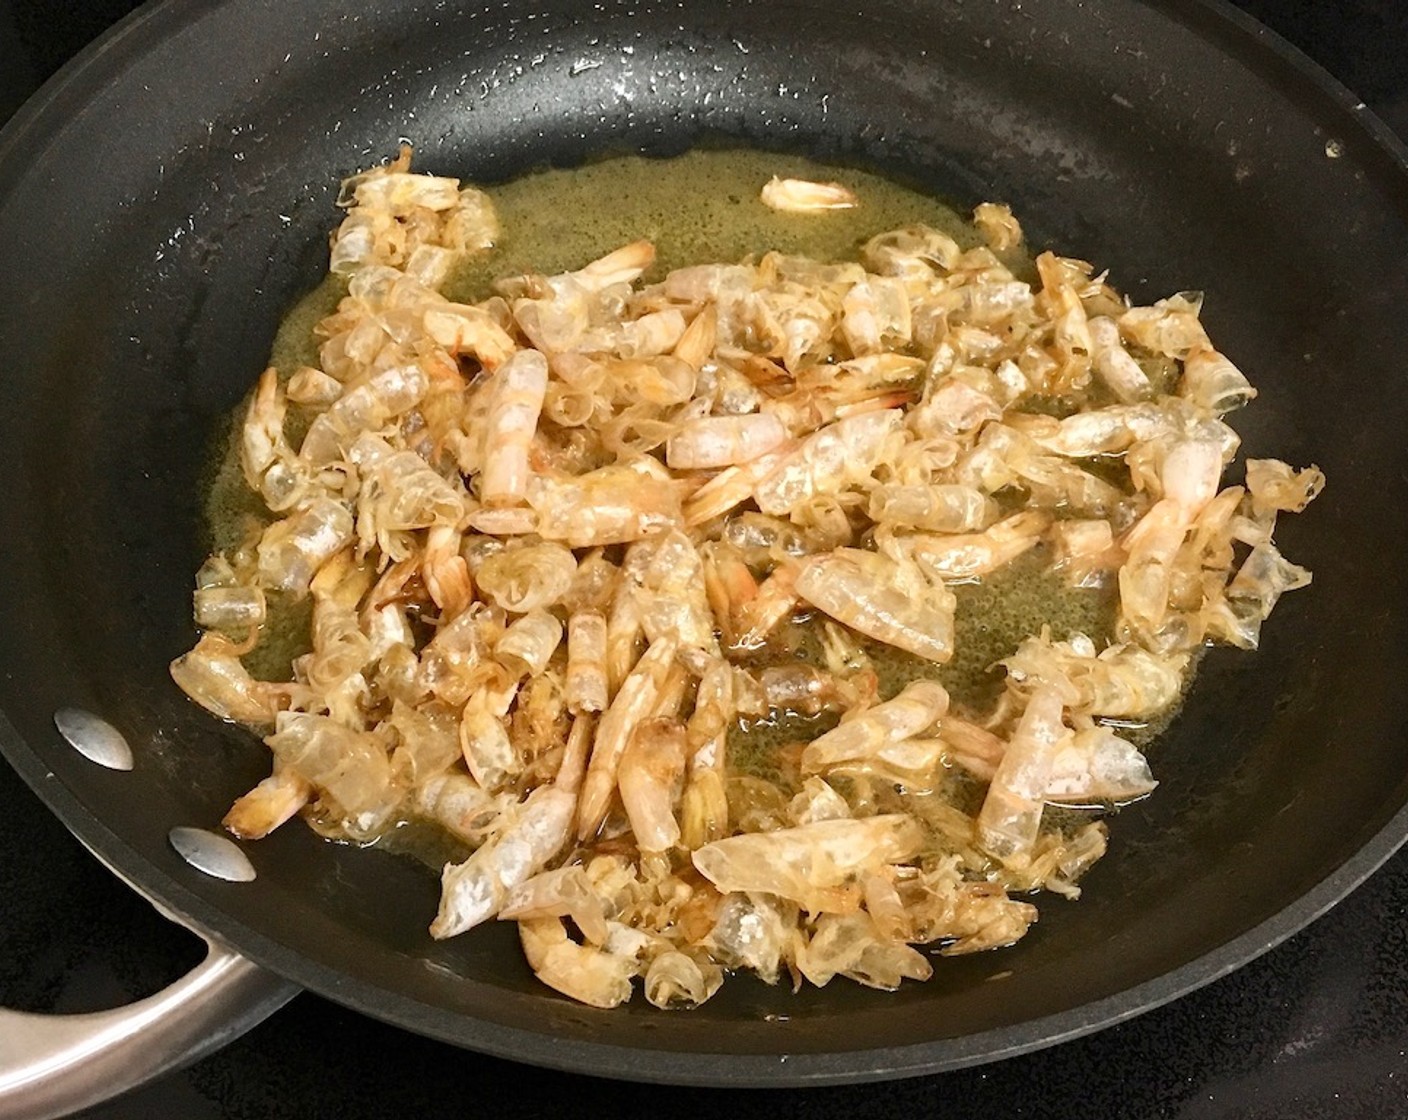 step 2 In a large skillet, heat Unsalted Butter (1/4 cup) and Olive Oil (1/4 cup) over medium-high heat. Add the shrimp shells and sauté for 5 minutes until they are golden and fragrant.